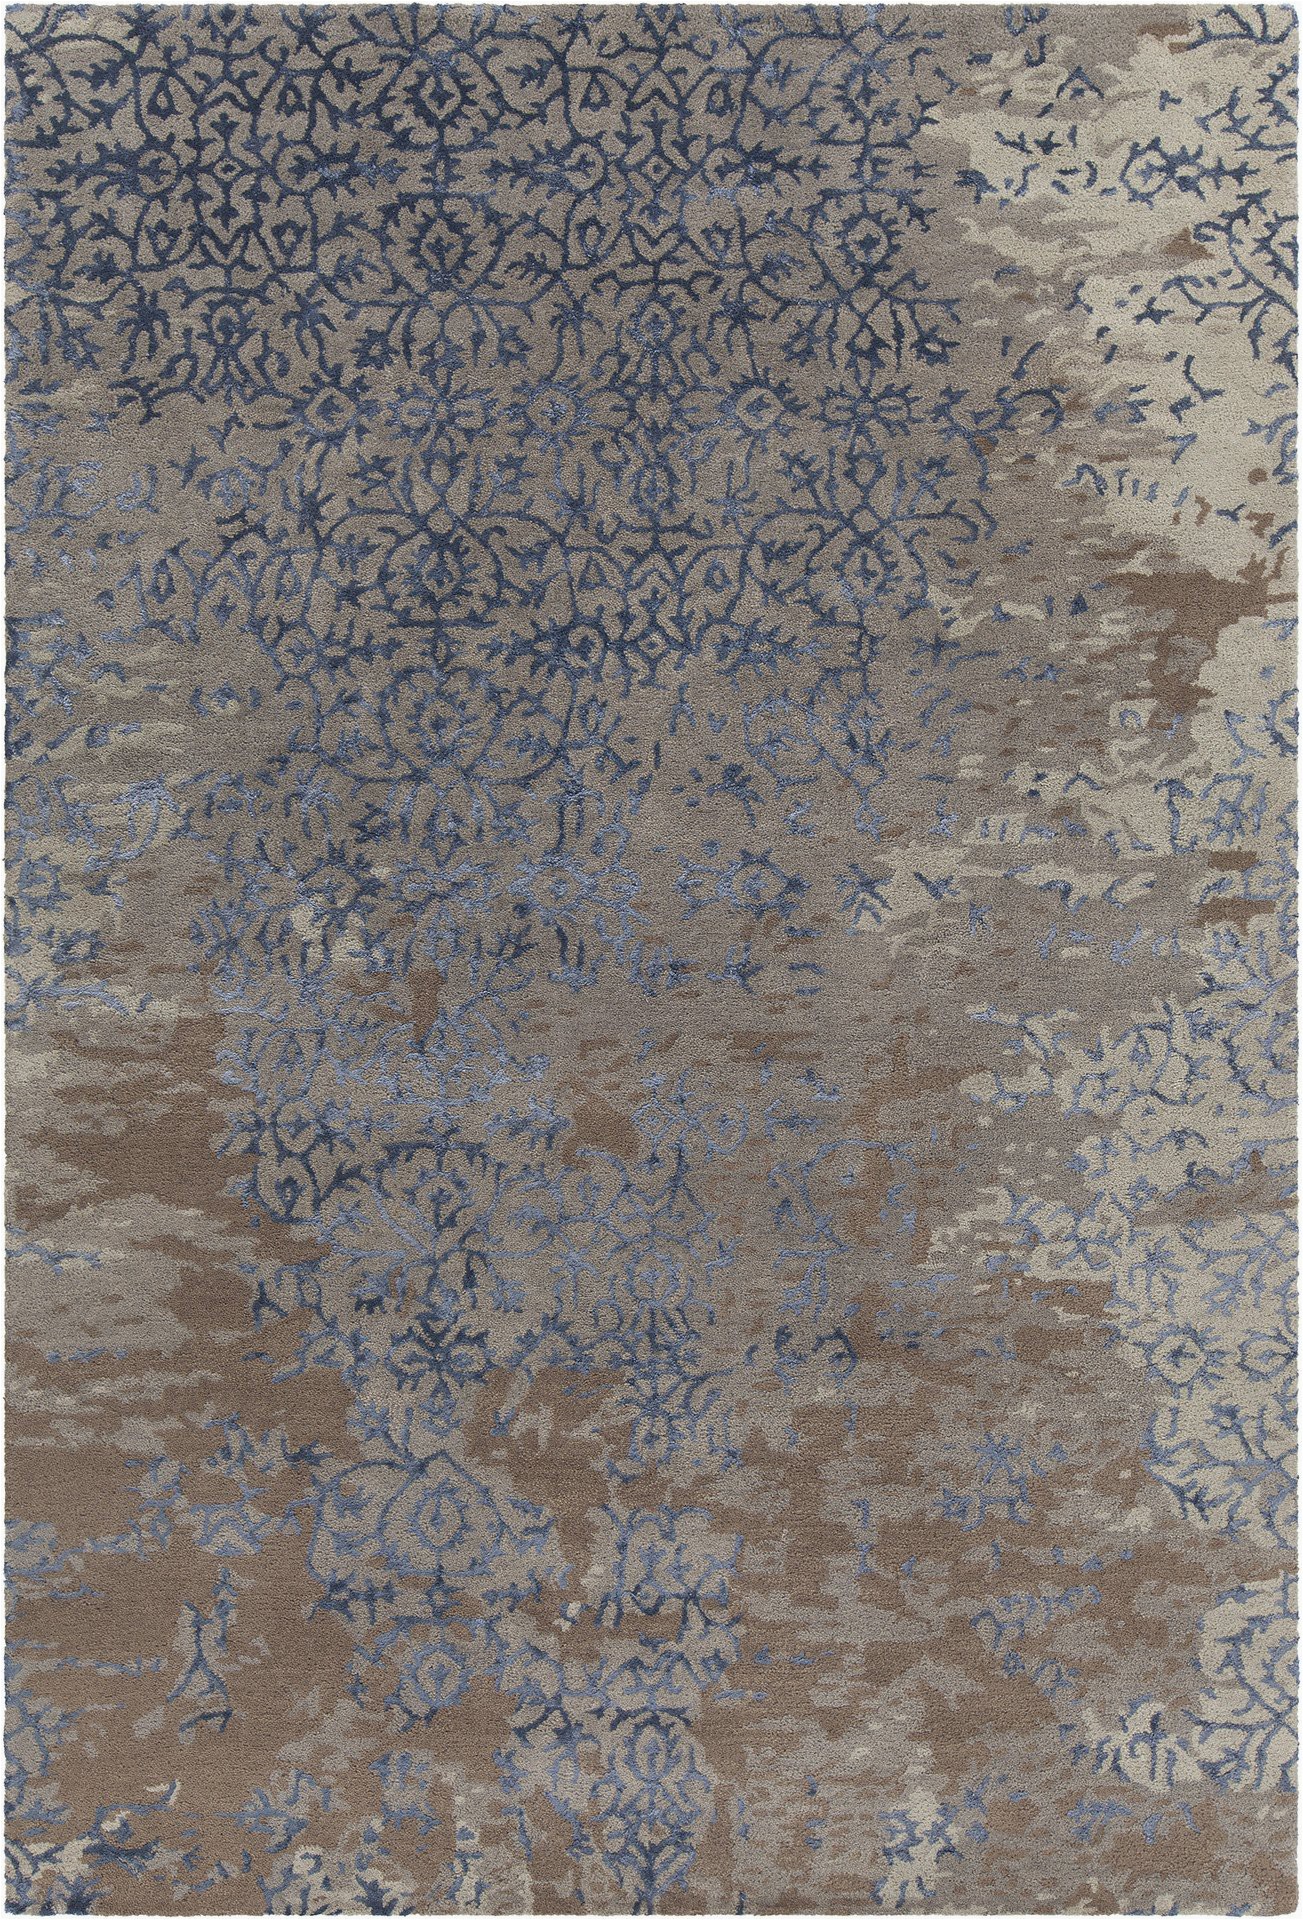 Area Rugs with Blue Accents Rupec Collection Hand Tufted area Rug In Grey Blue & Brown